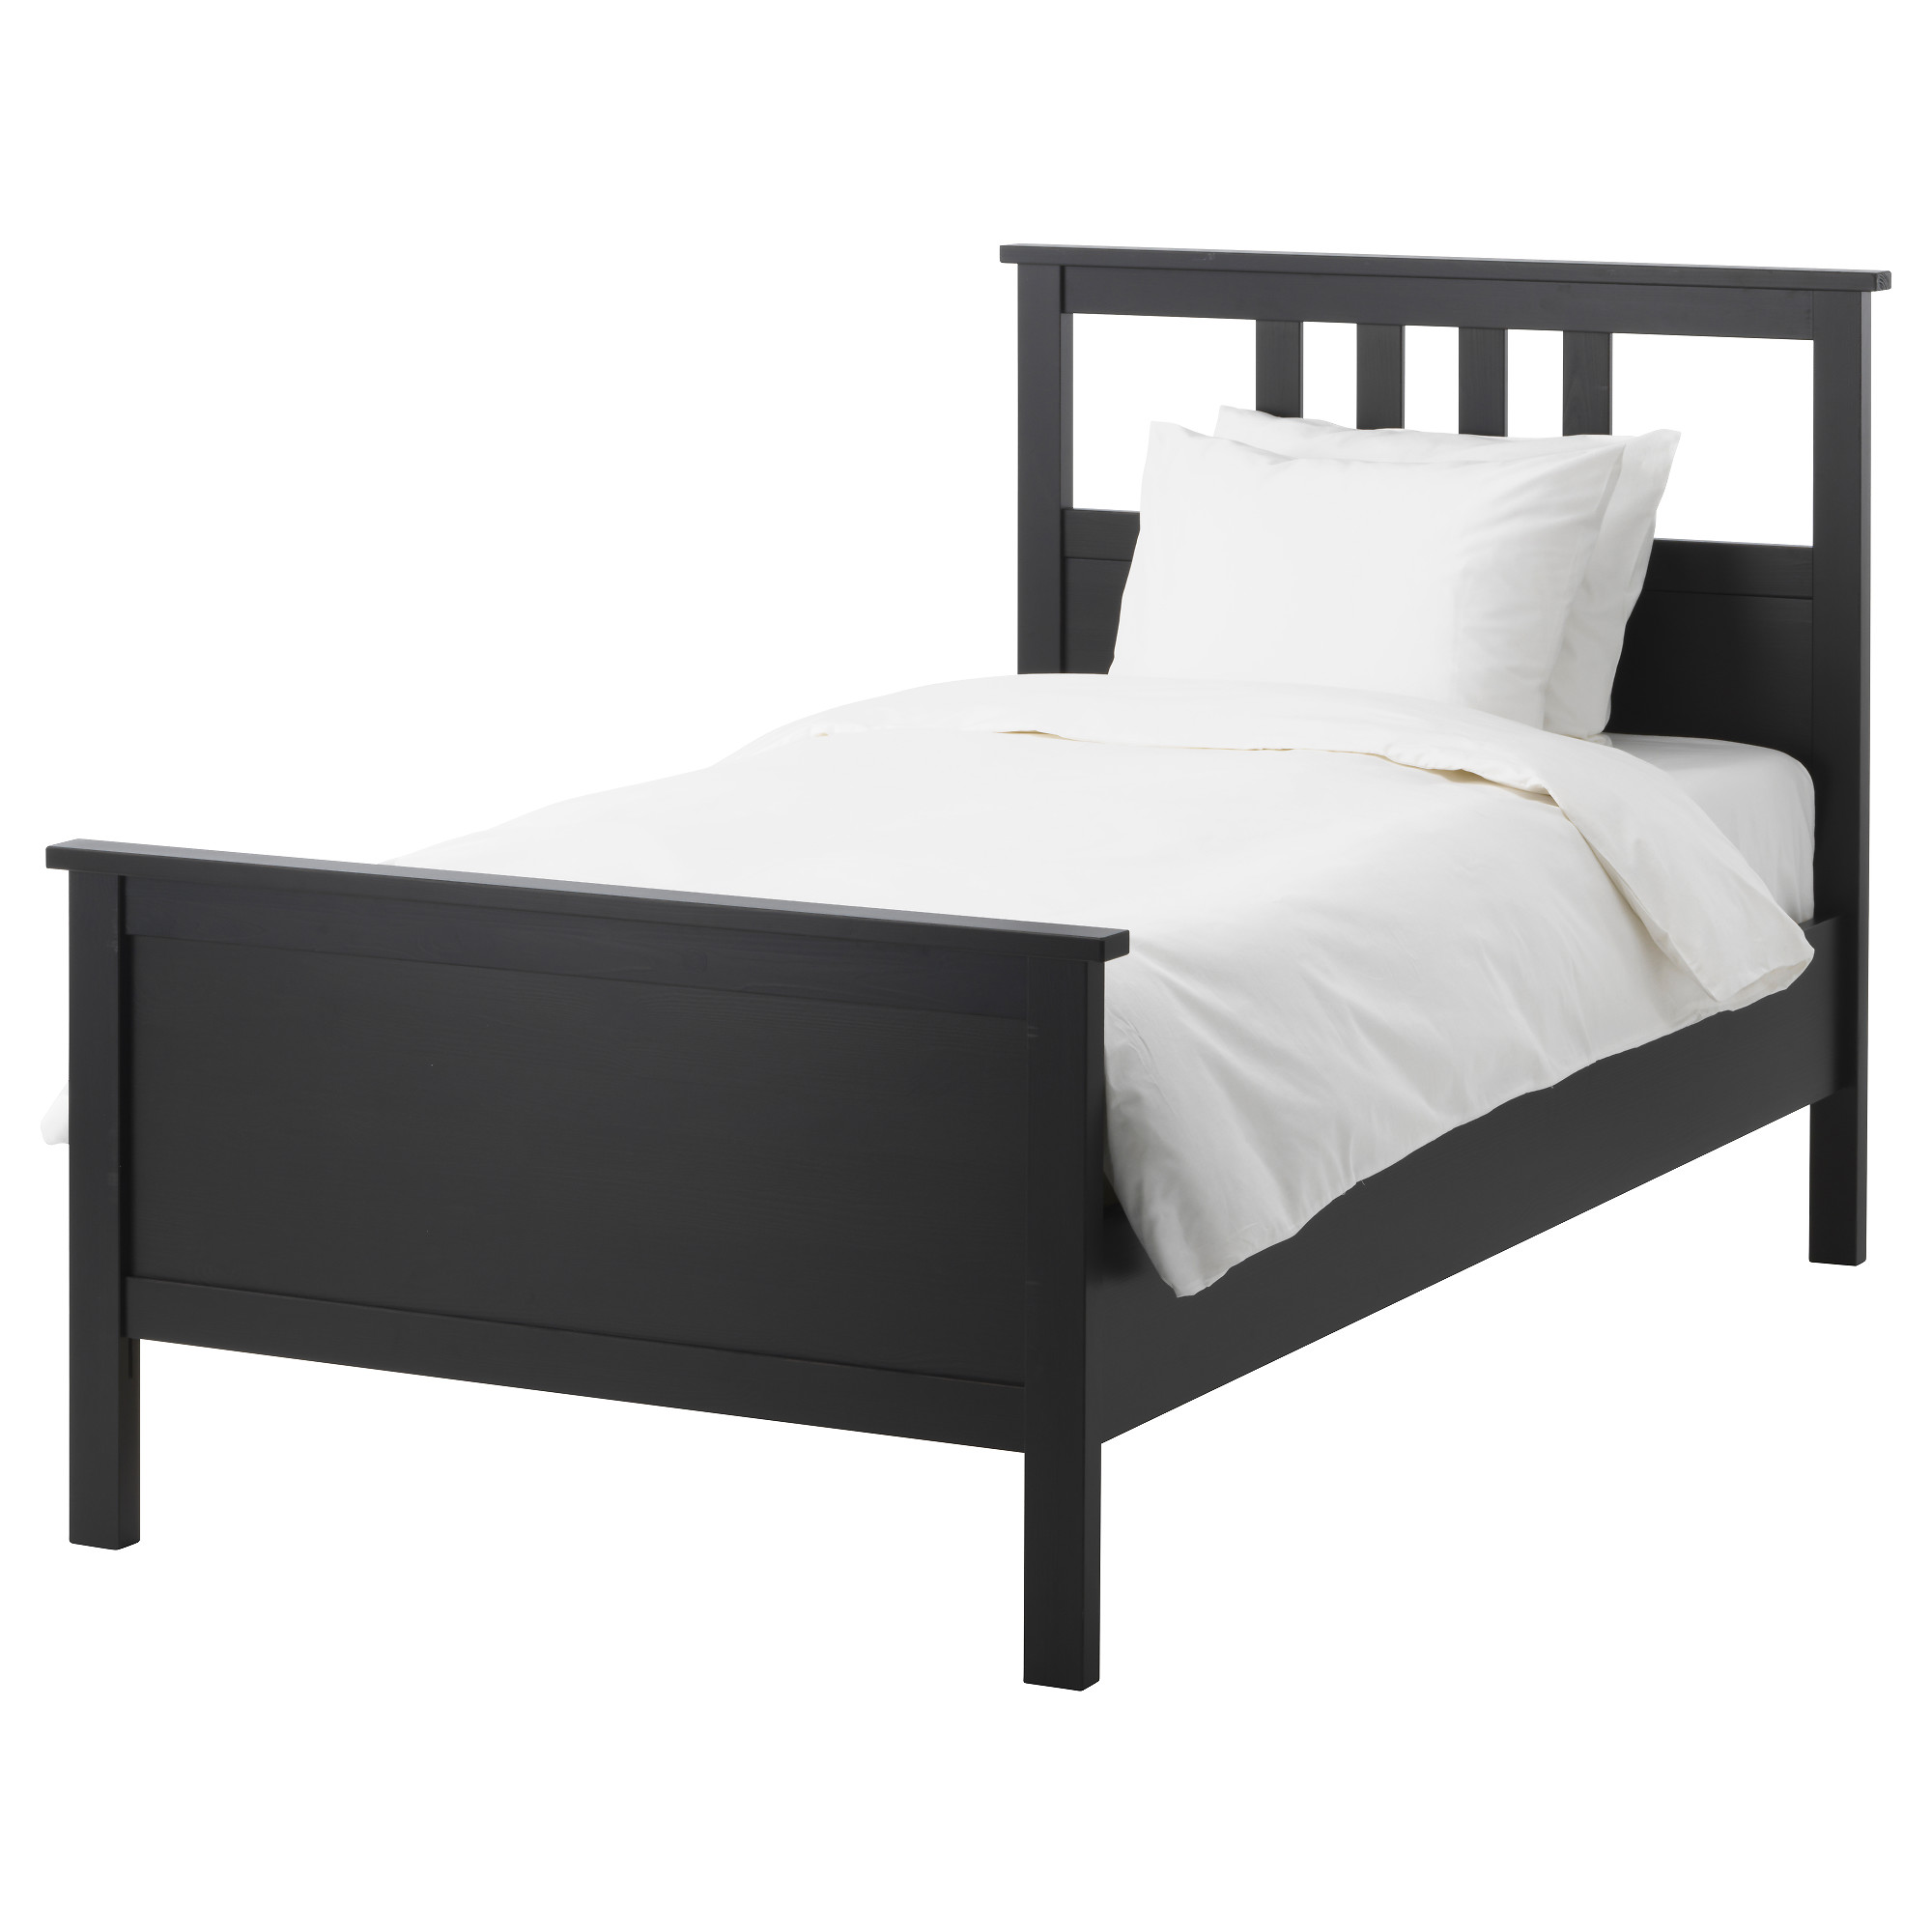 Cozy HEMNES Bed frame - IKEA twin bed frame